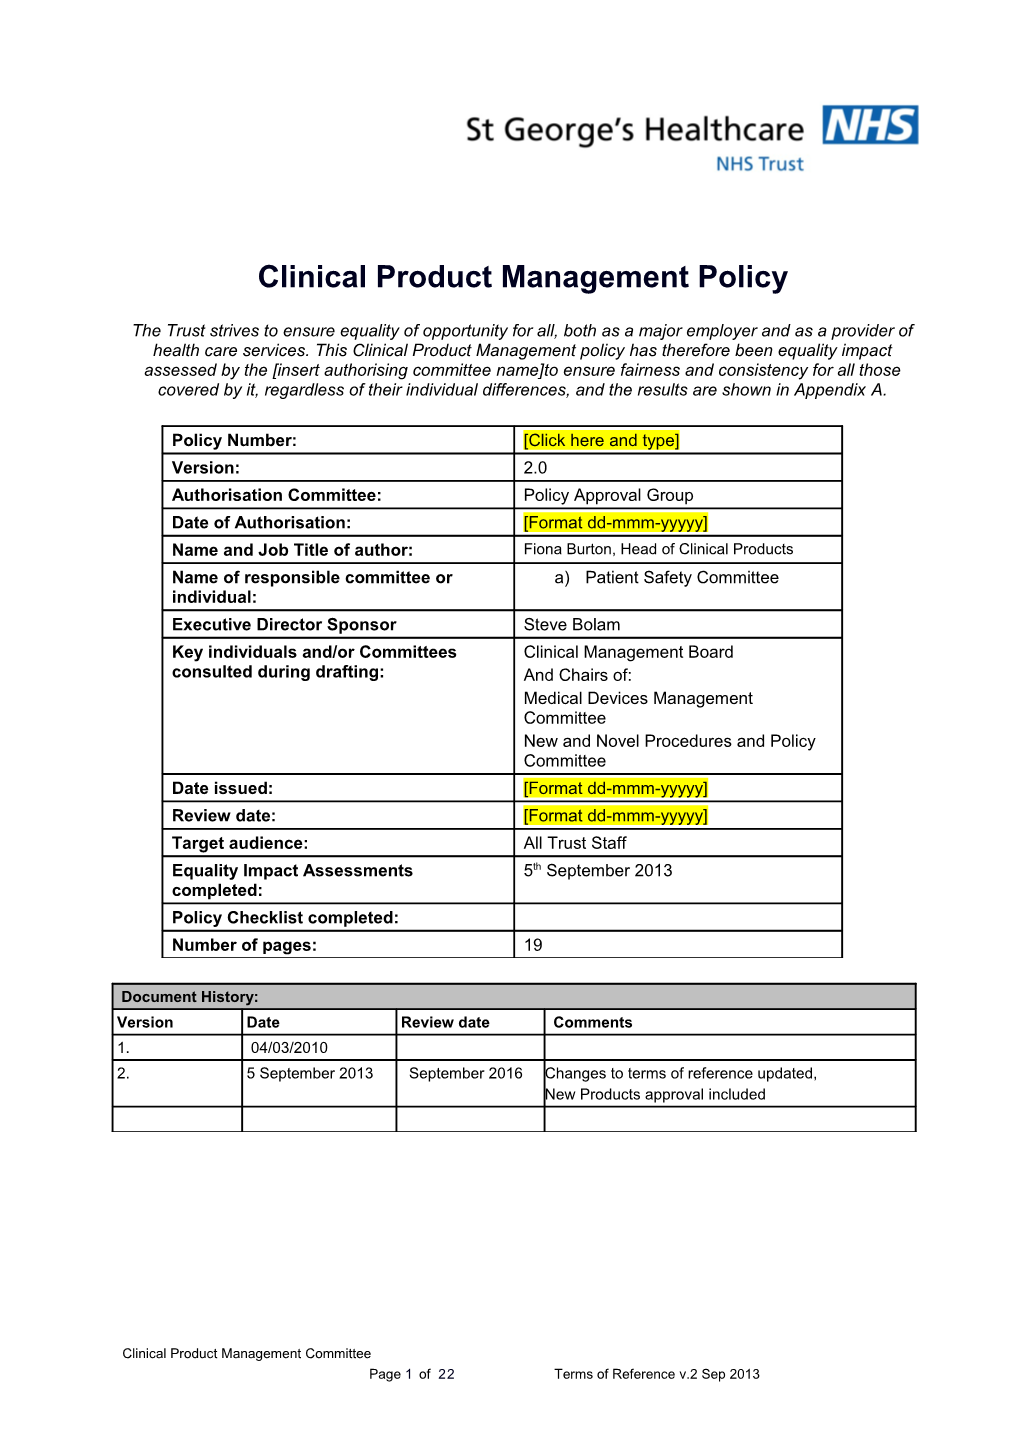 Clinical Product Management Policy